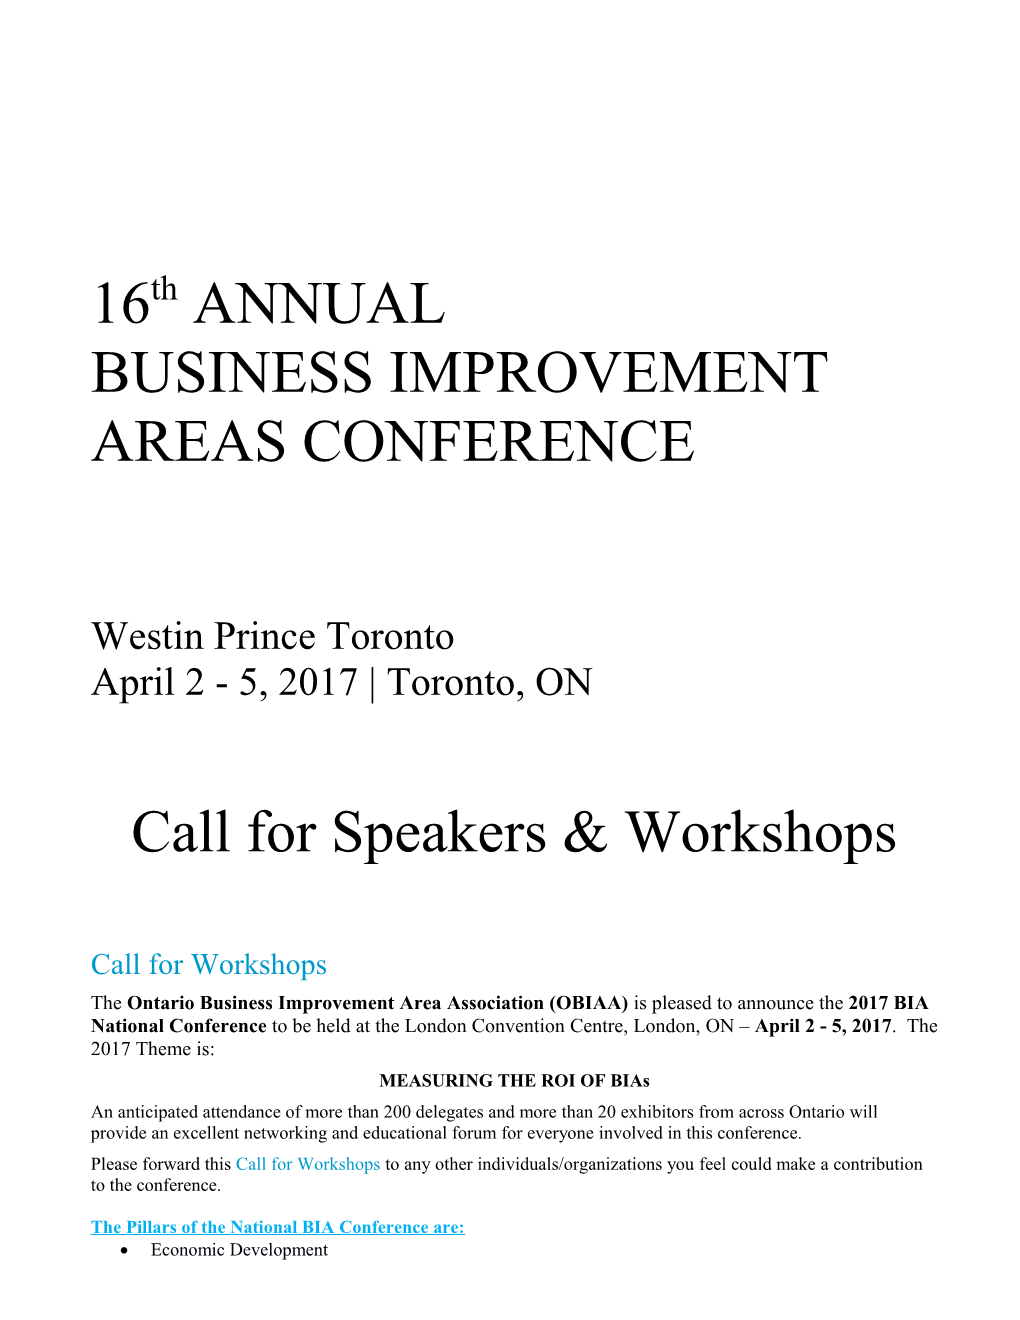 Business Improvement Areas Conference